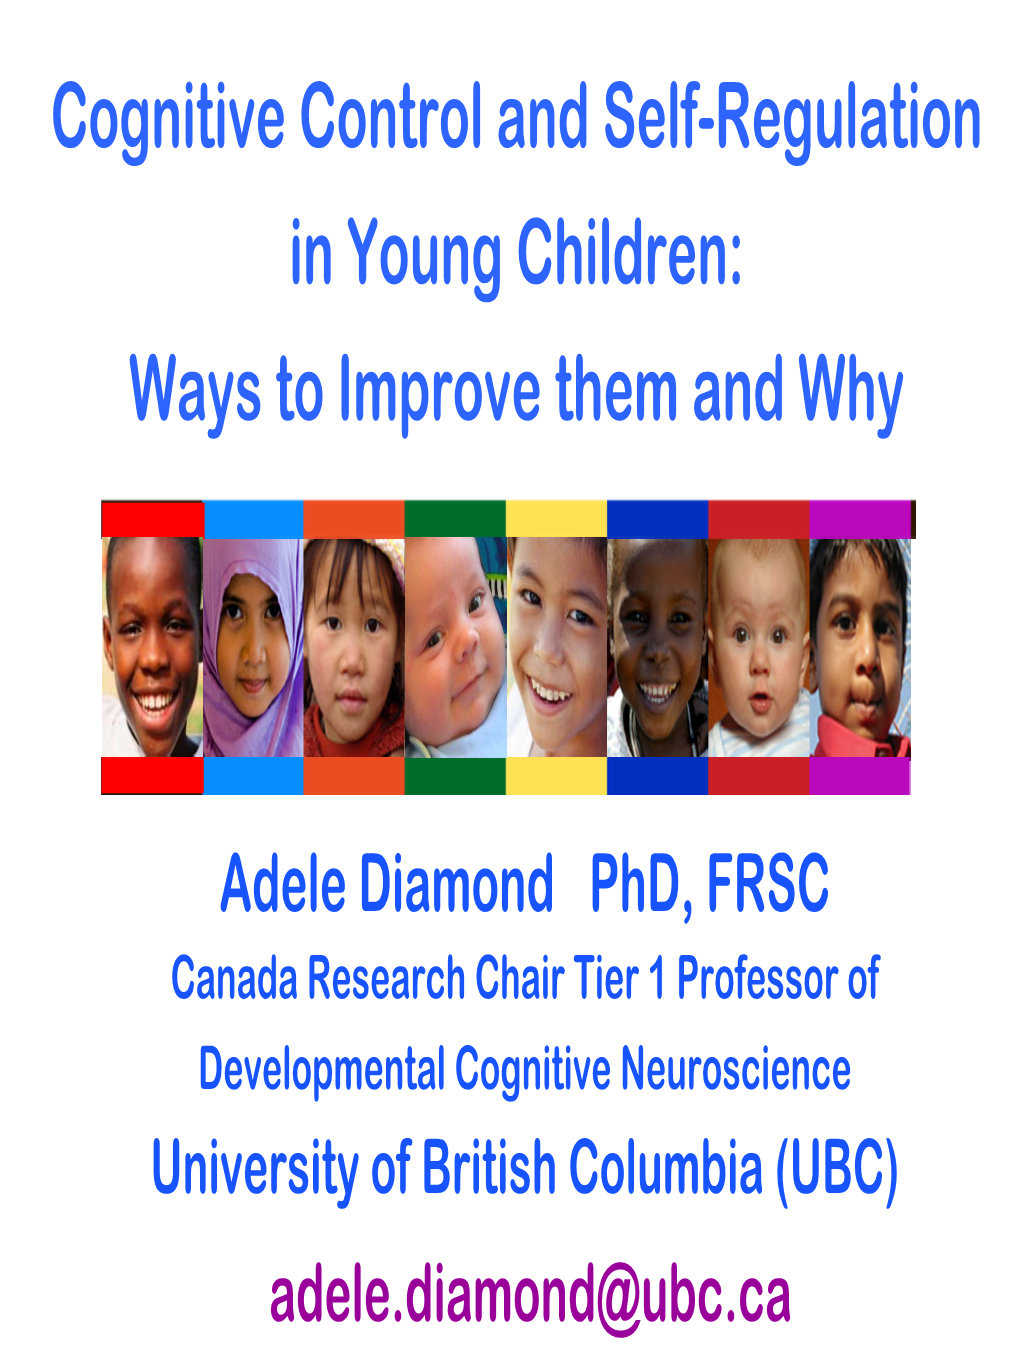 Cognitive Control and Self-Regulation in Young Children: Ways to Improve Them and Why